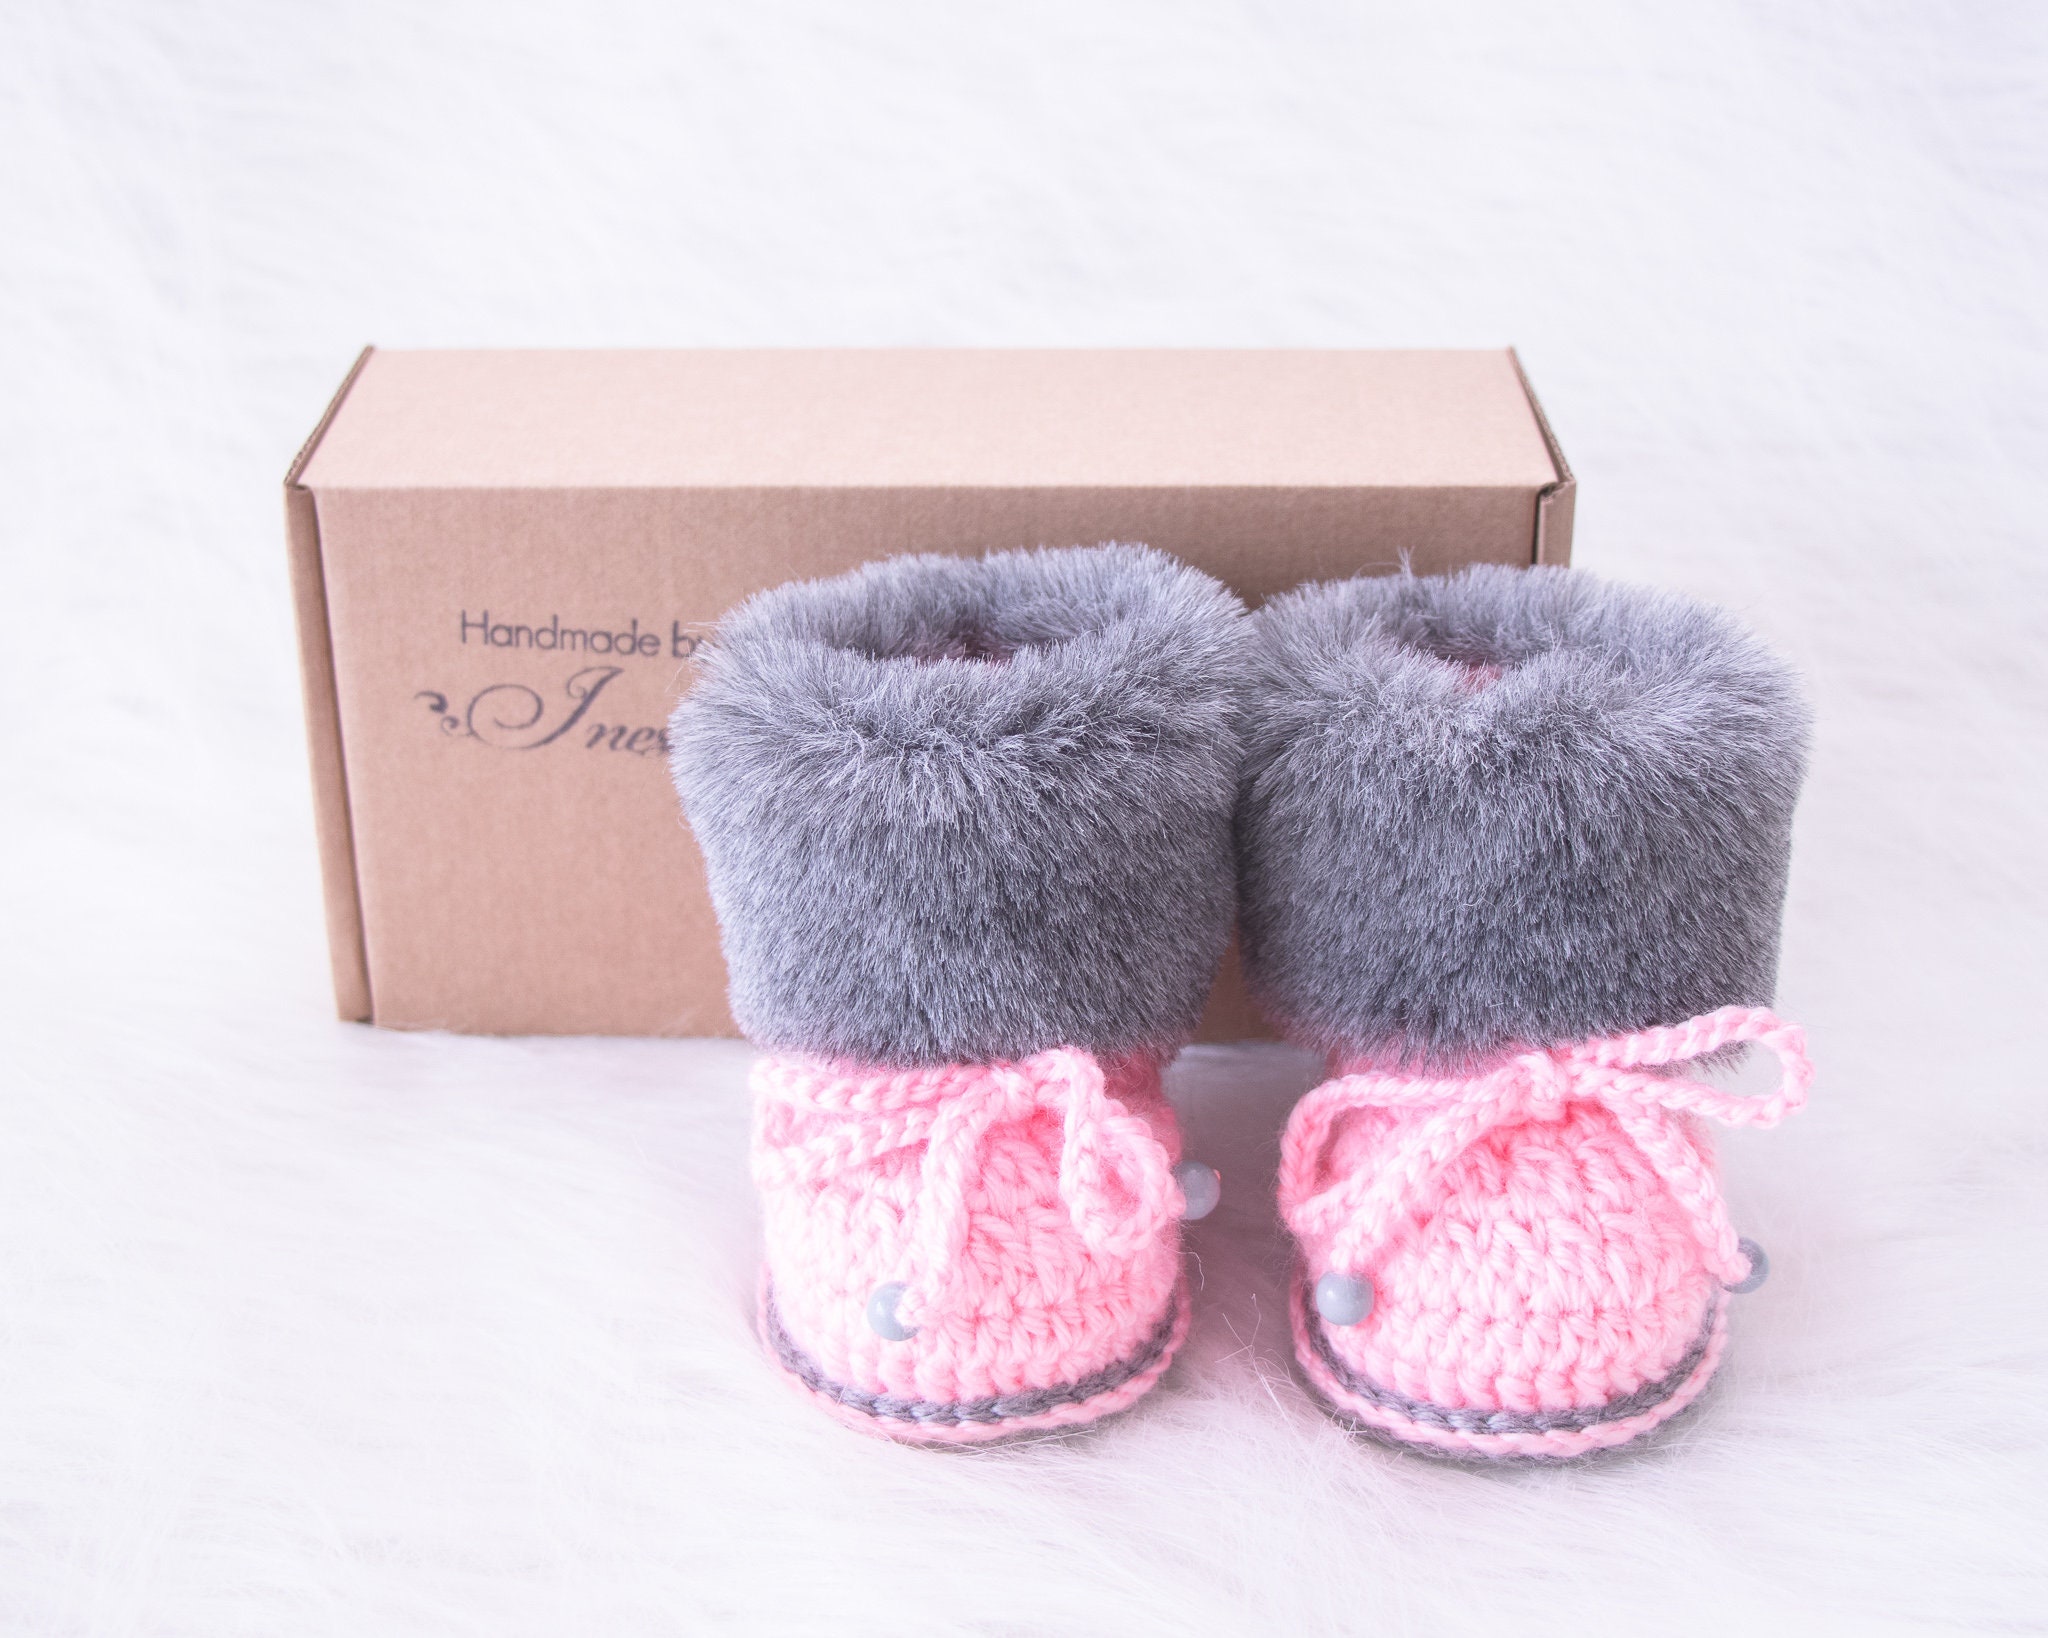 baby girl shoes and boots